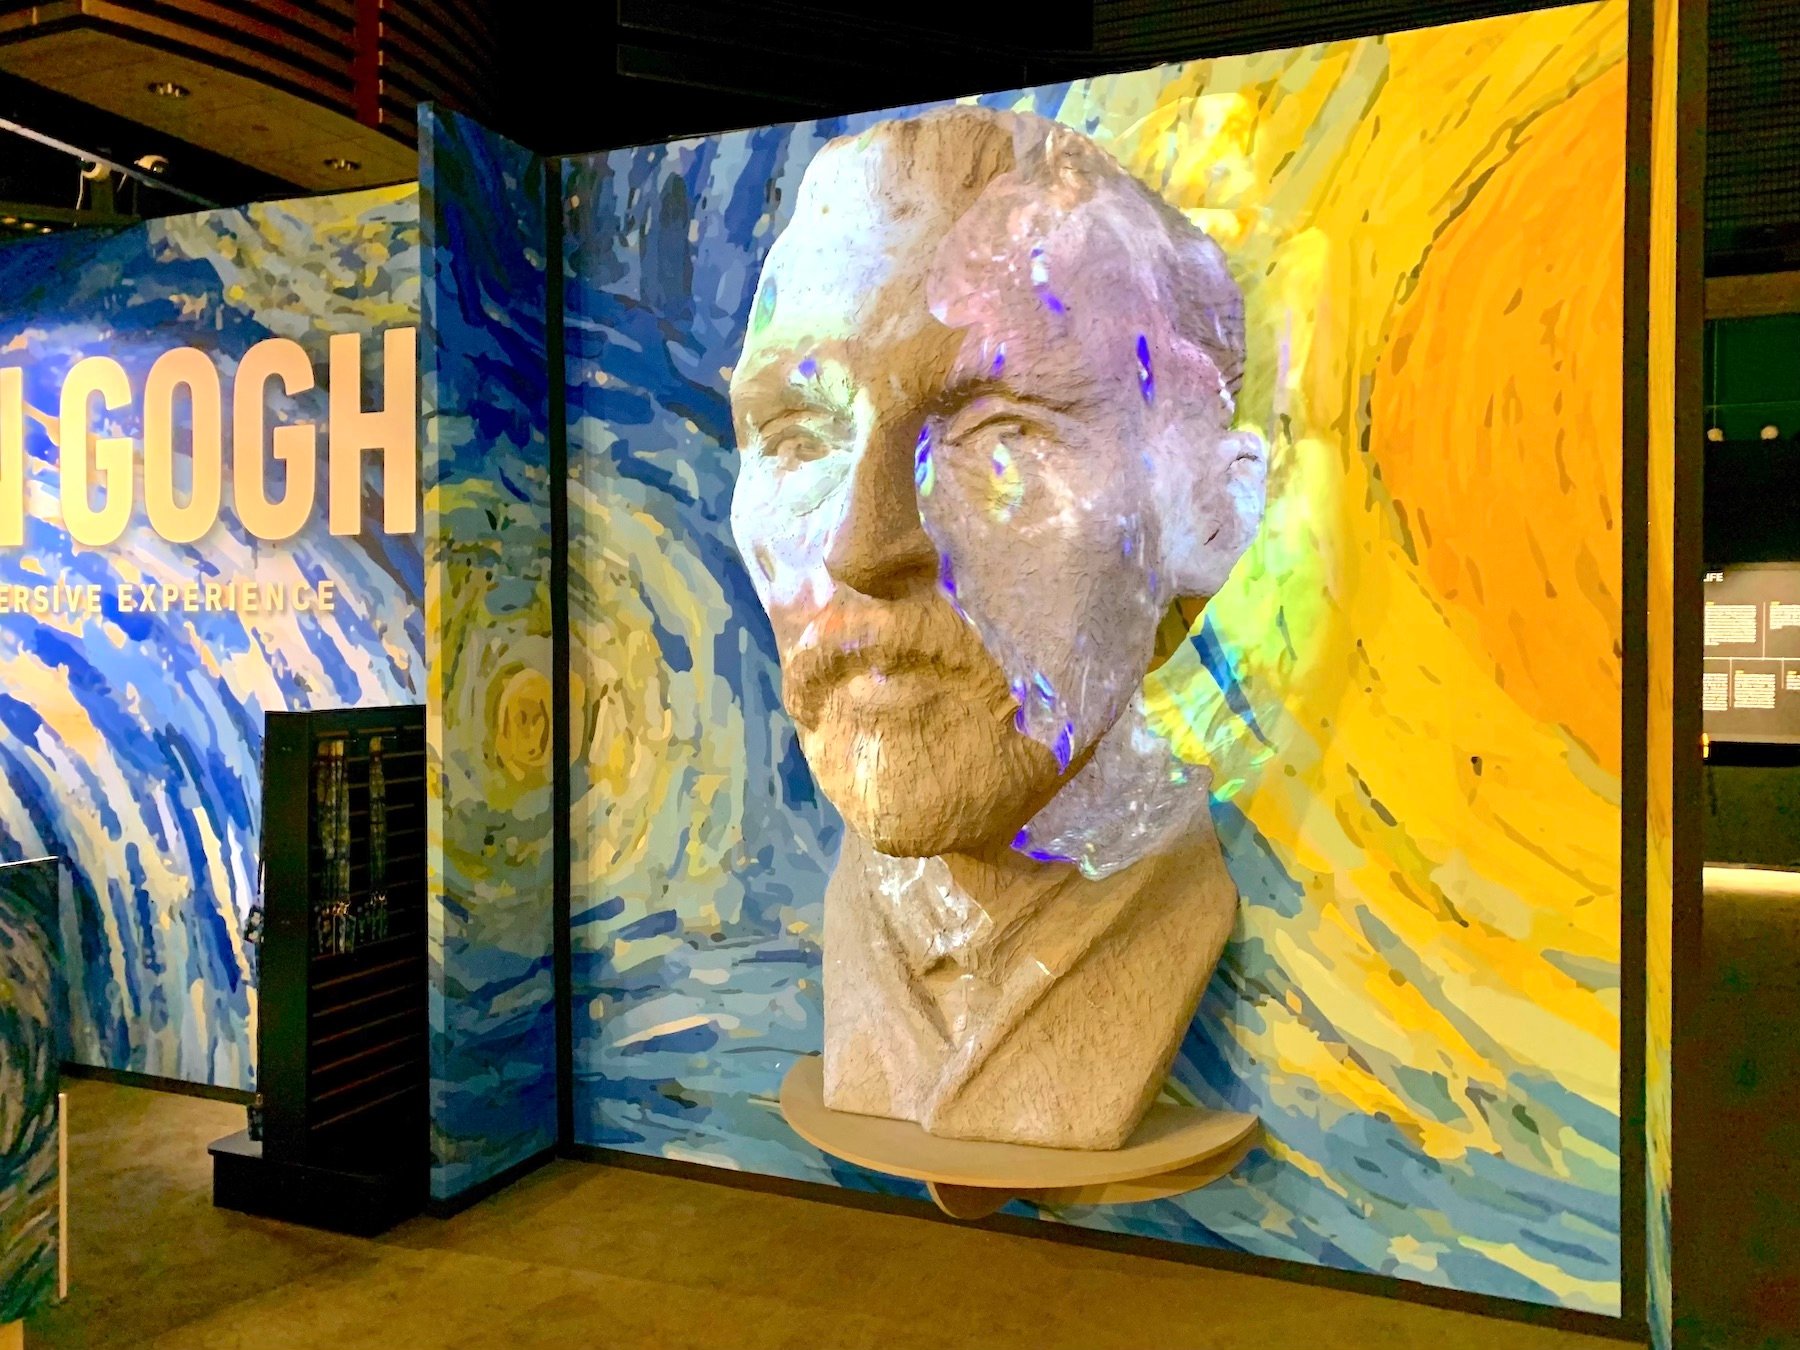 Two Immersive Van Gogh Experiences Offer The Post Pandemic Escapism